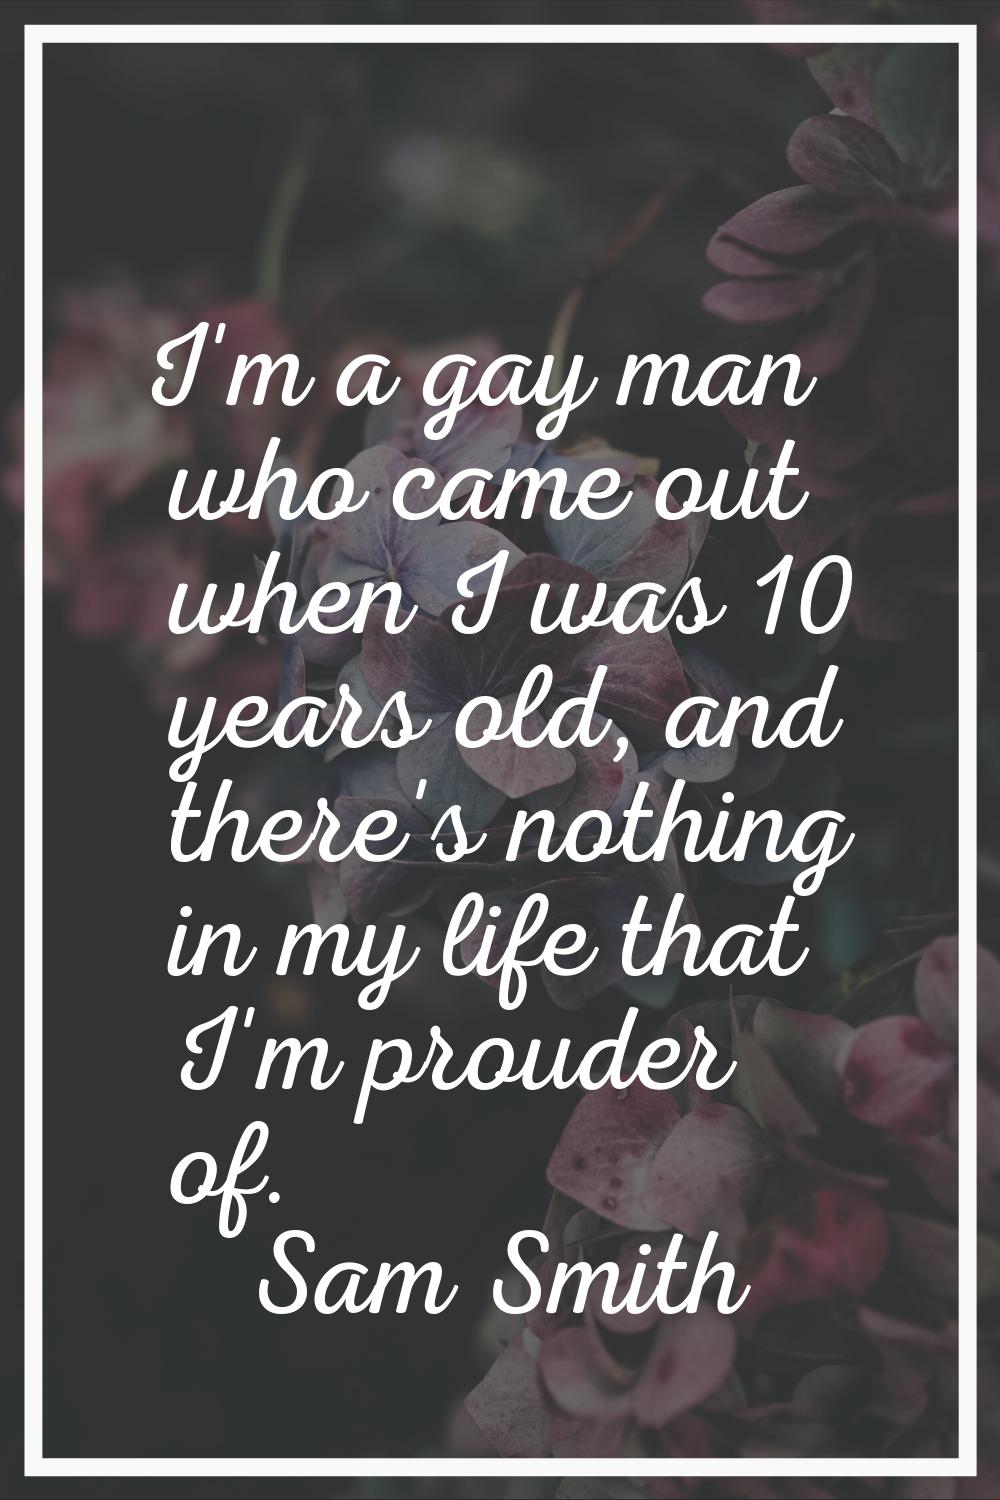 I'm a gay man who came out when I was 10 years old, and there's nothing in my life that I'm prouder